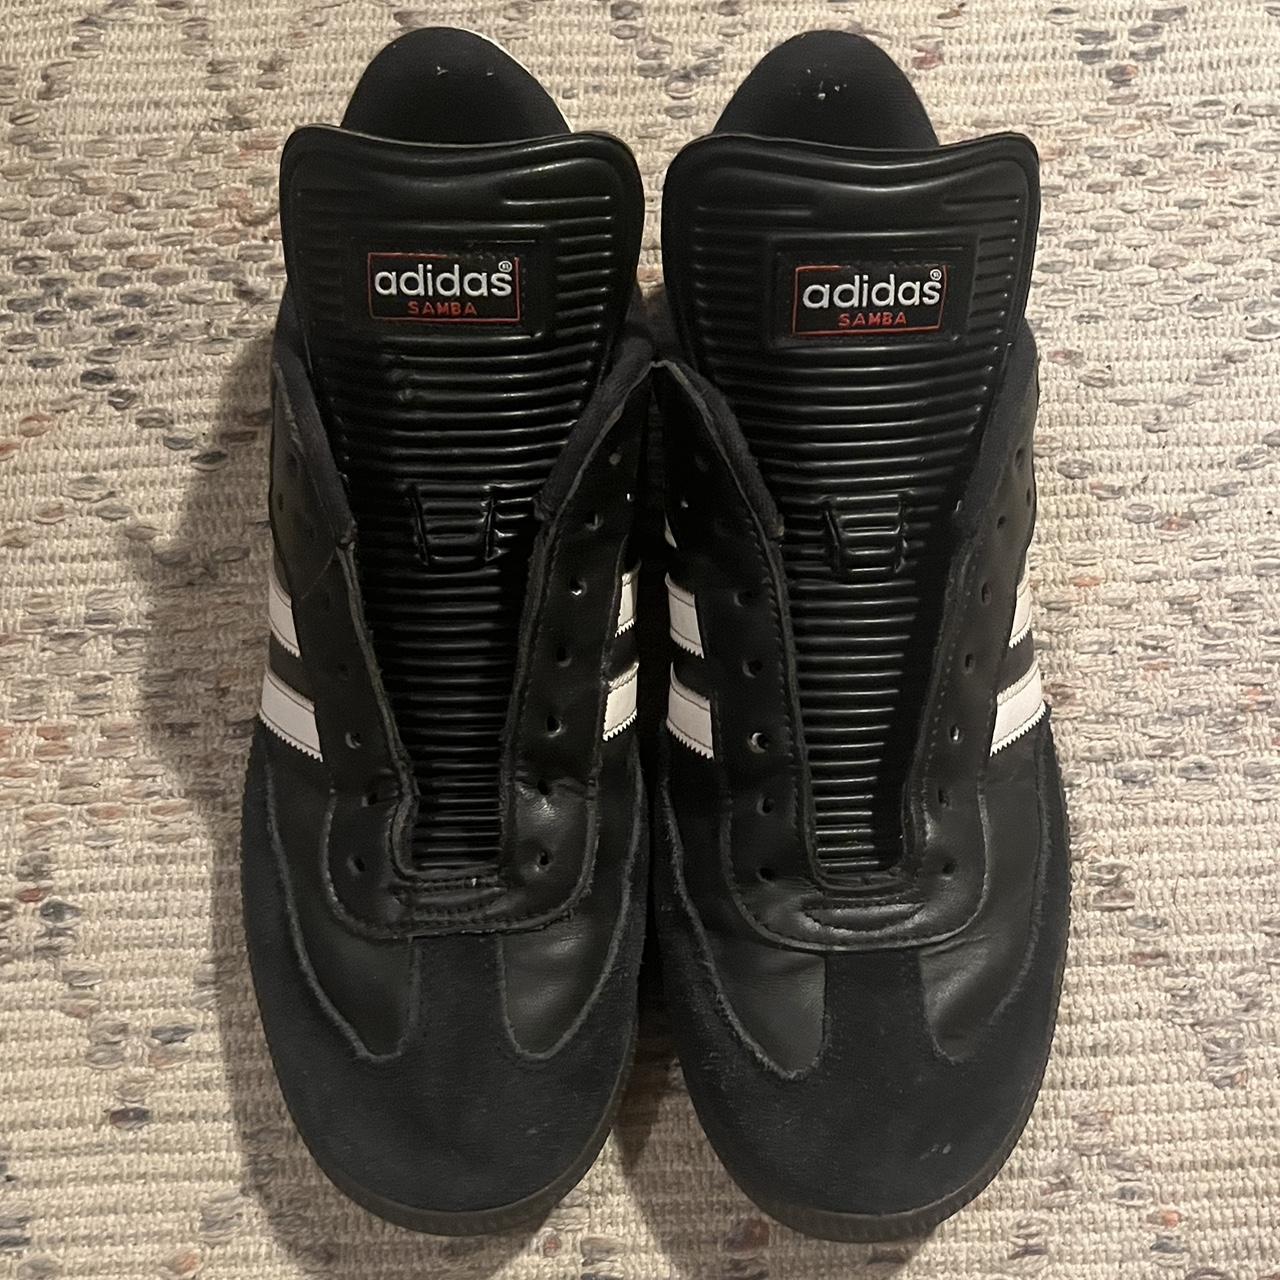 Adidas Men's Black and White Trainers (2)